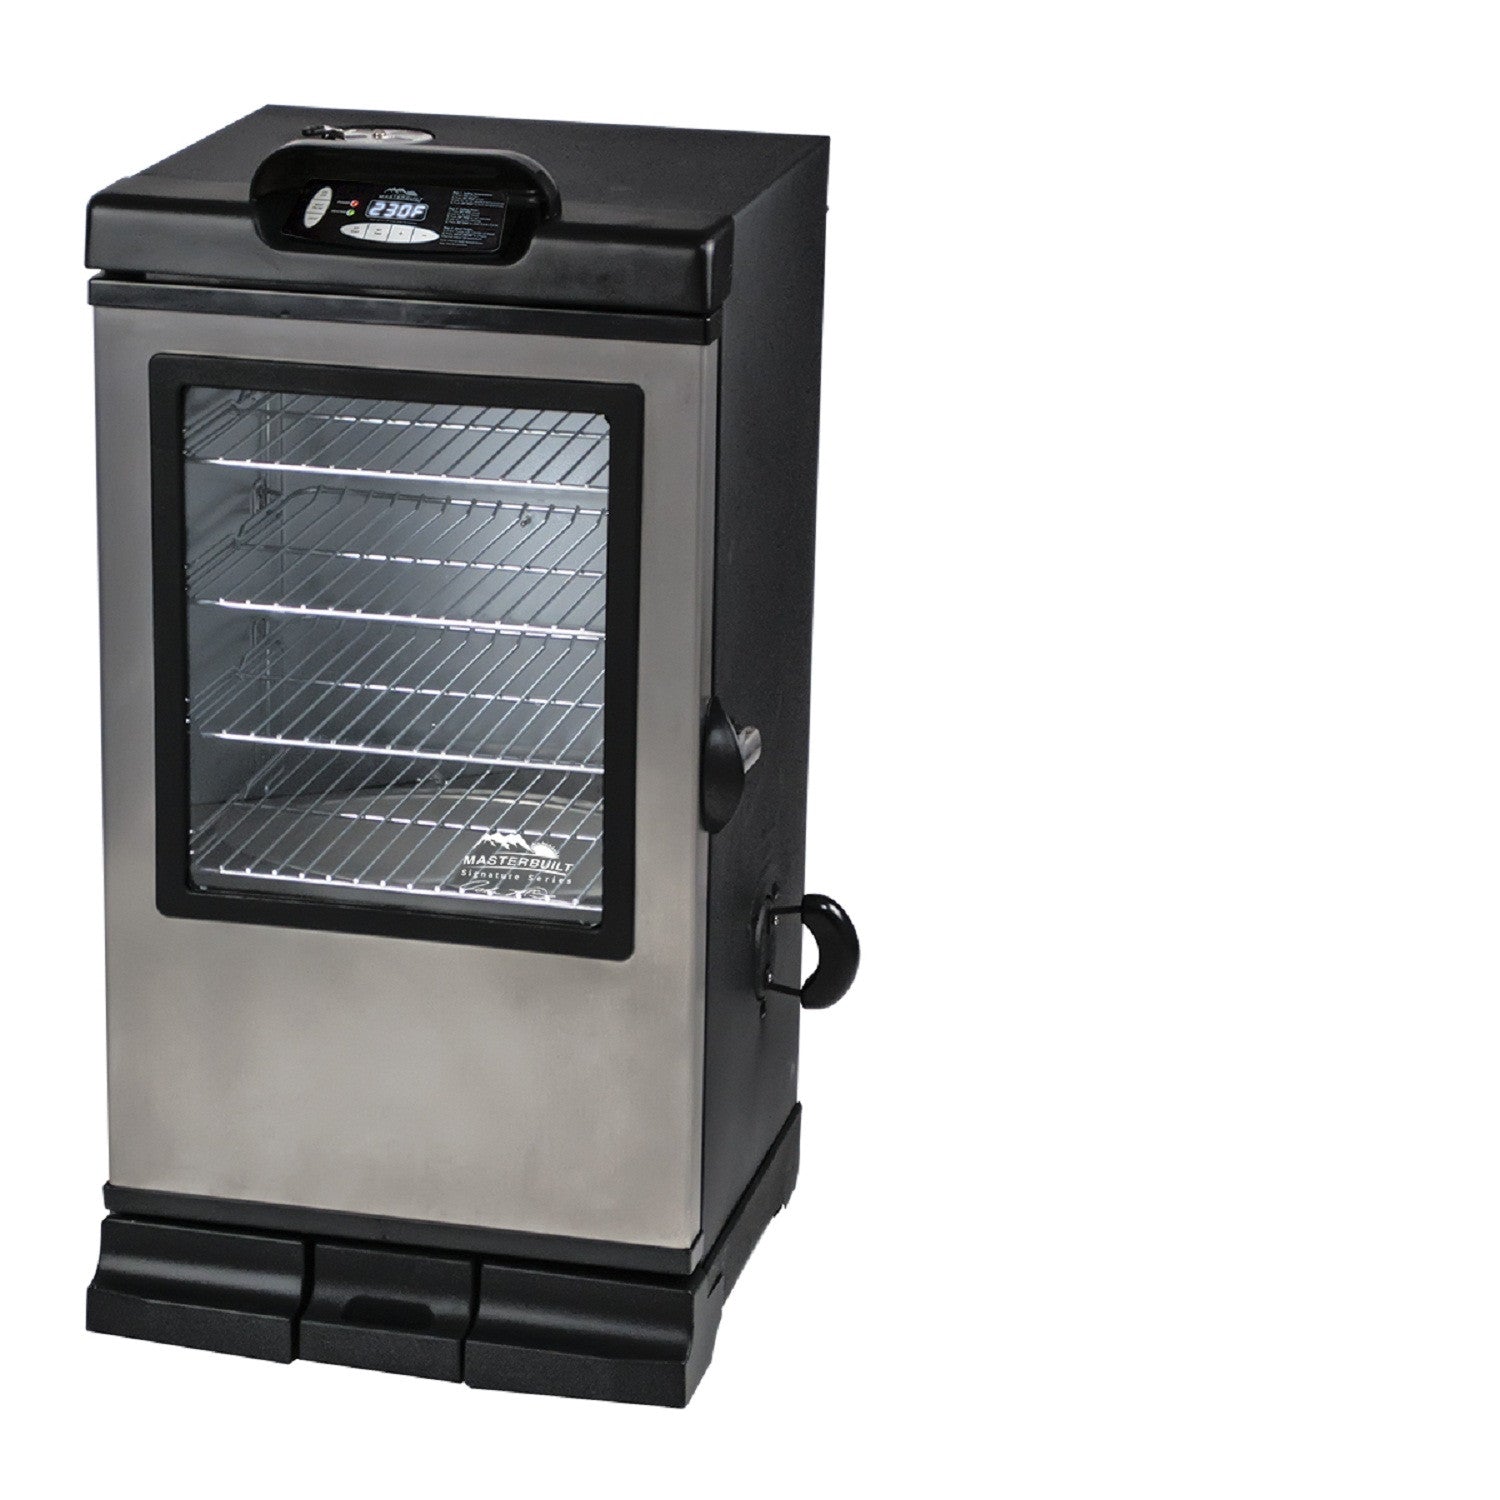 Why you should buy a Masterbuilt Electric Smoker